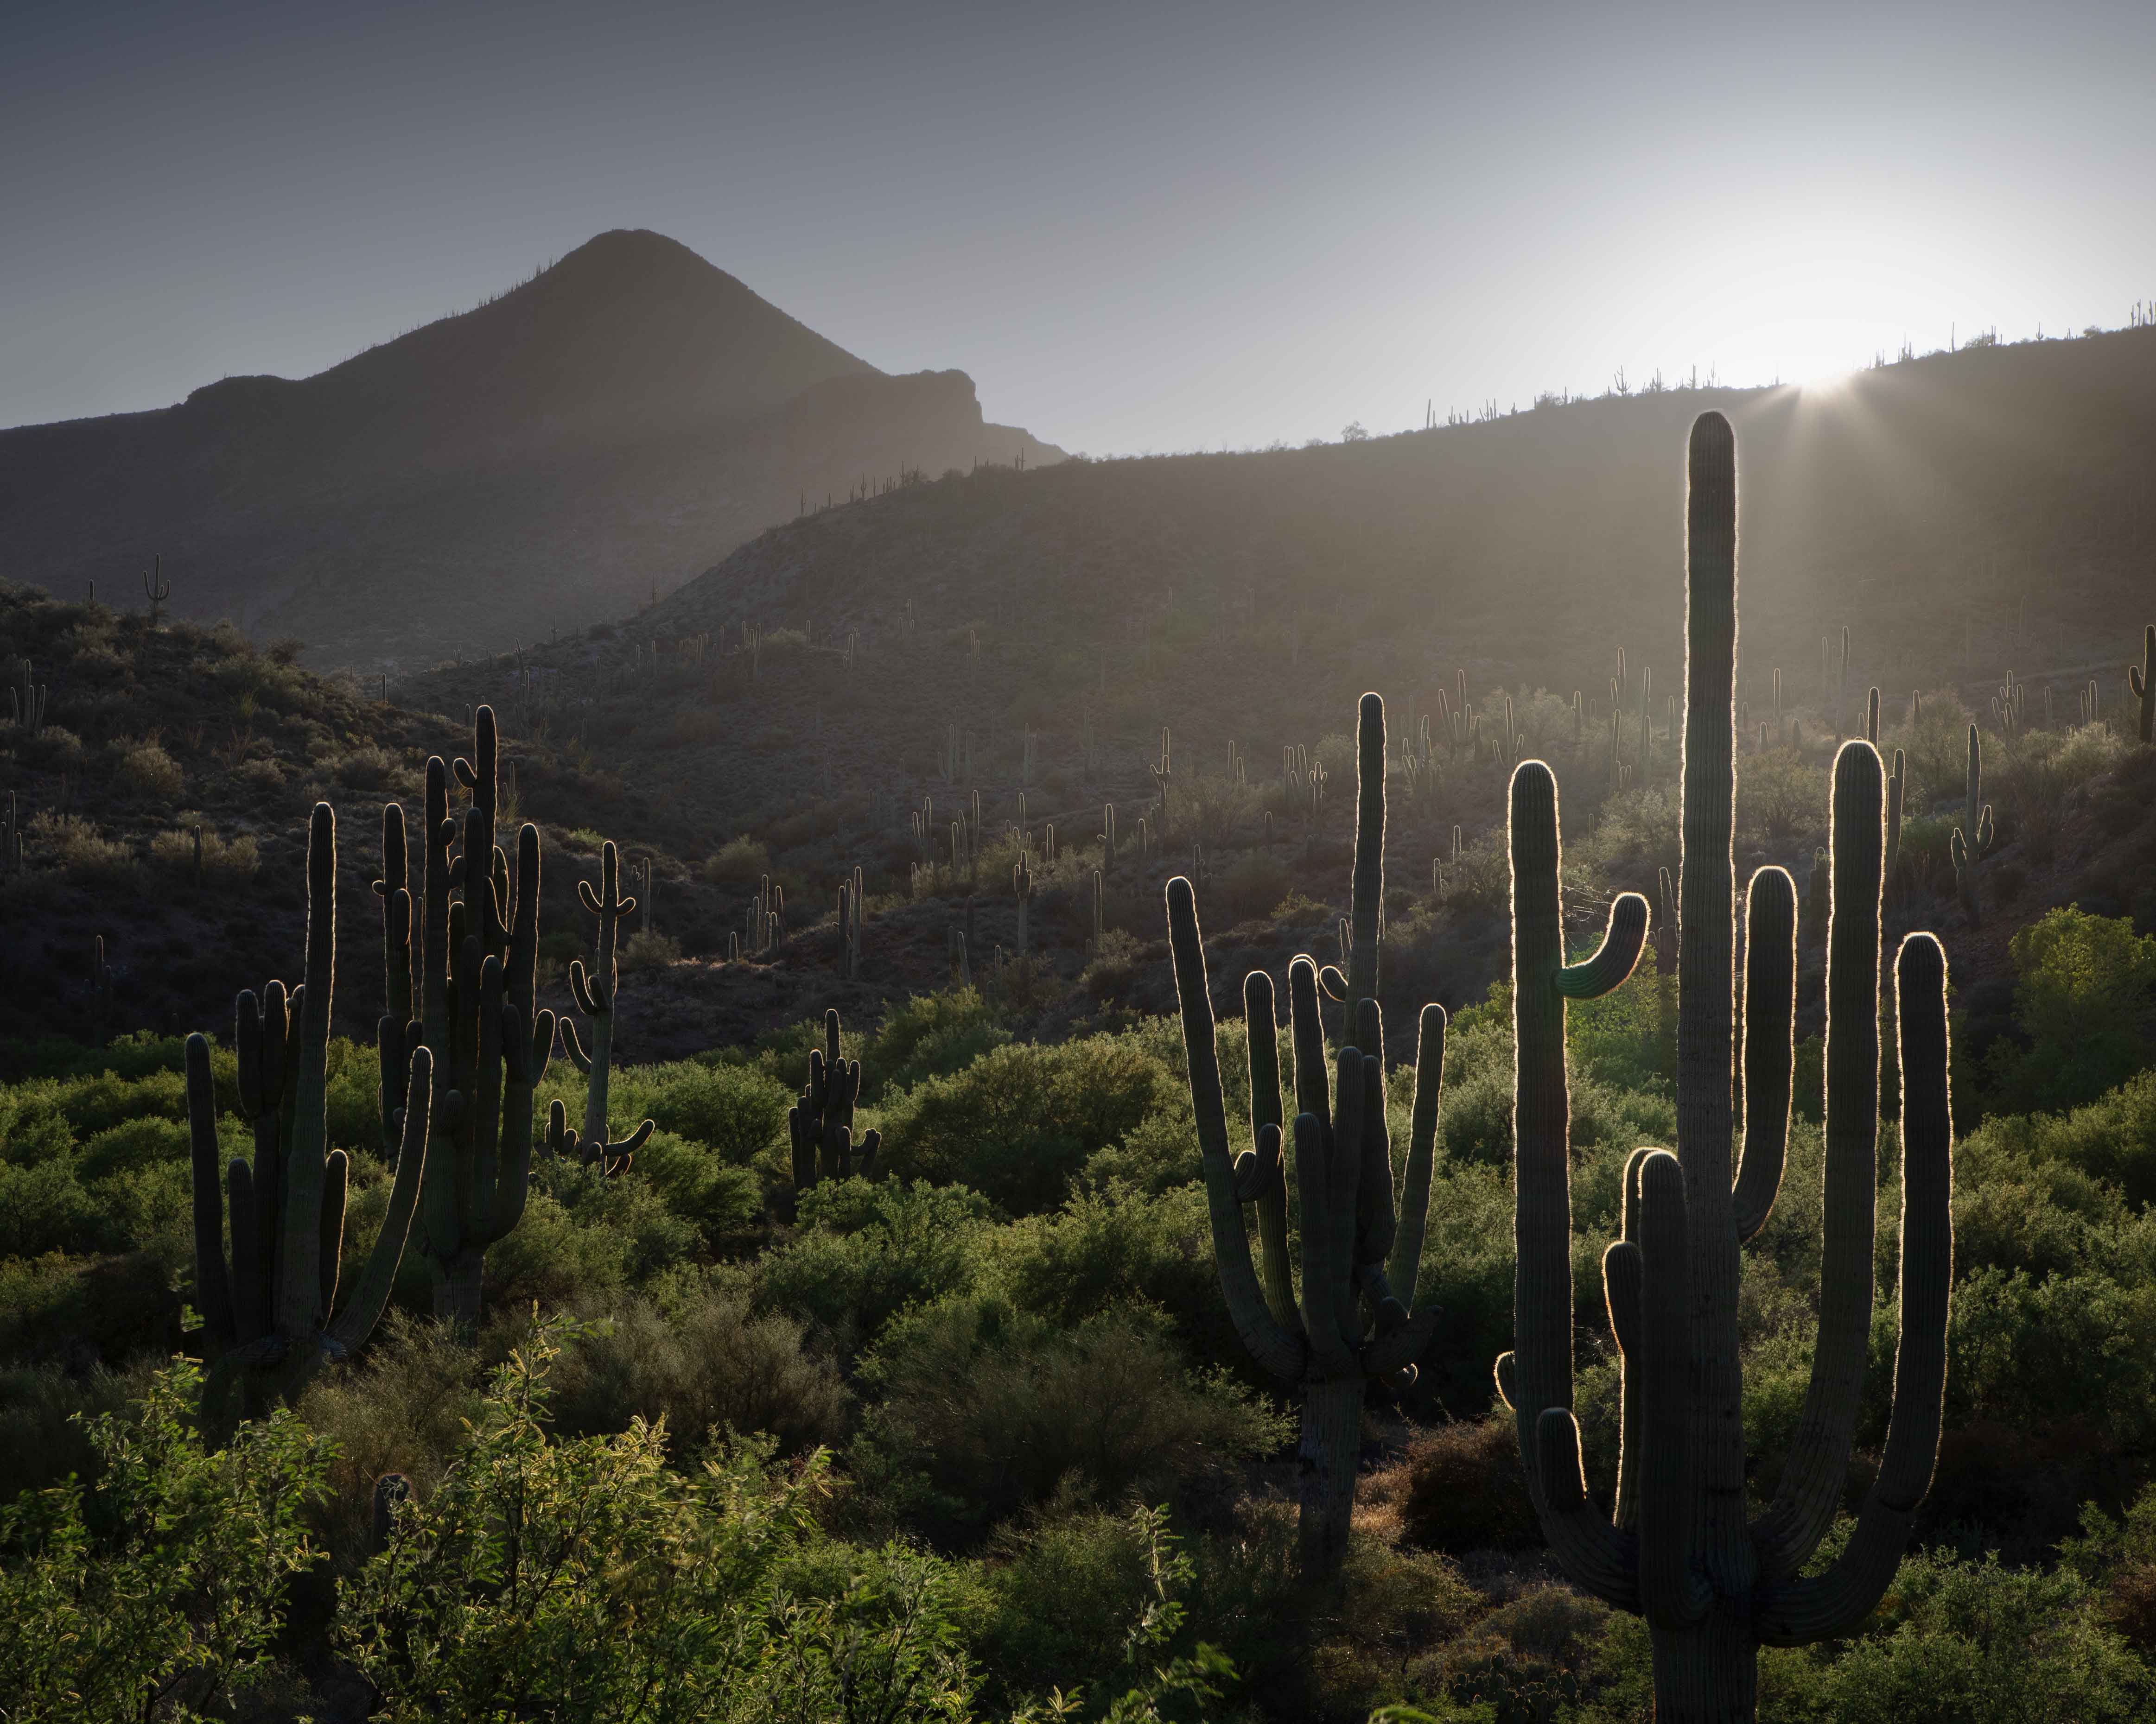 Heavily backlit saguaros at sunset in the Spur Cross Conservation area along Cave Creek, Arizona.